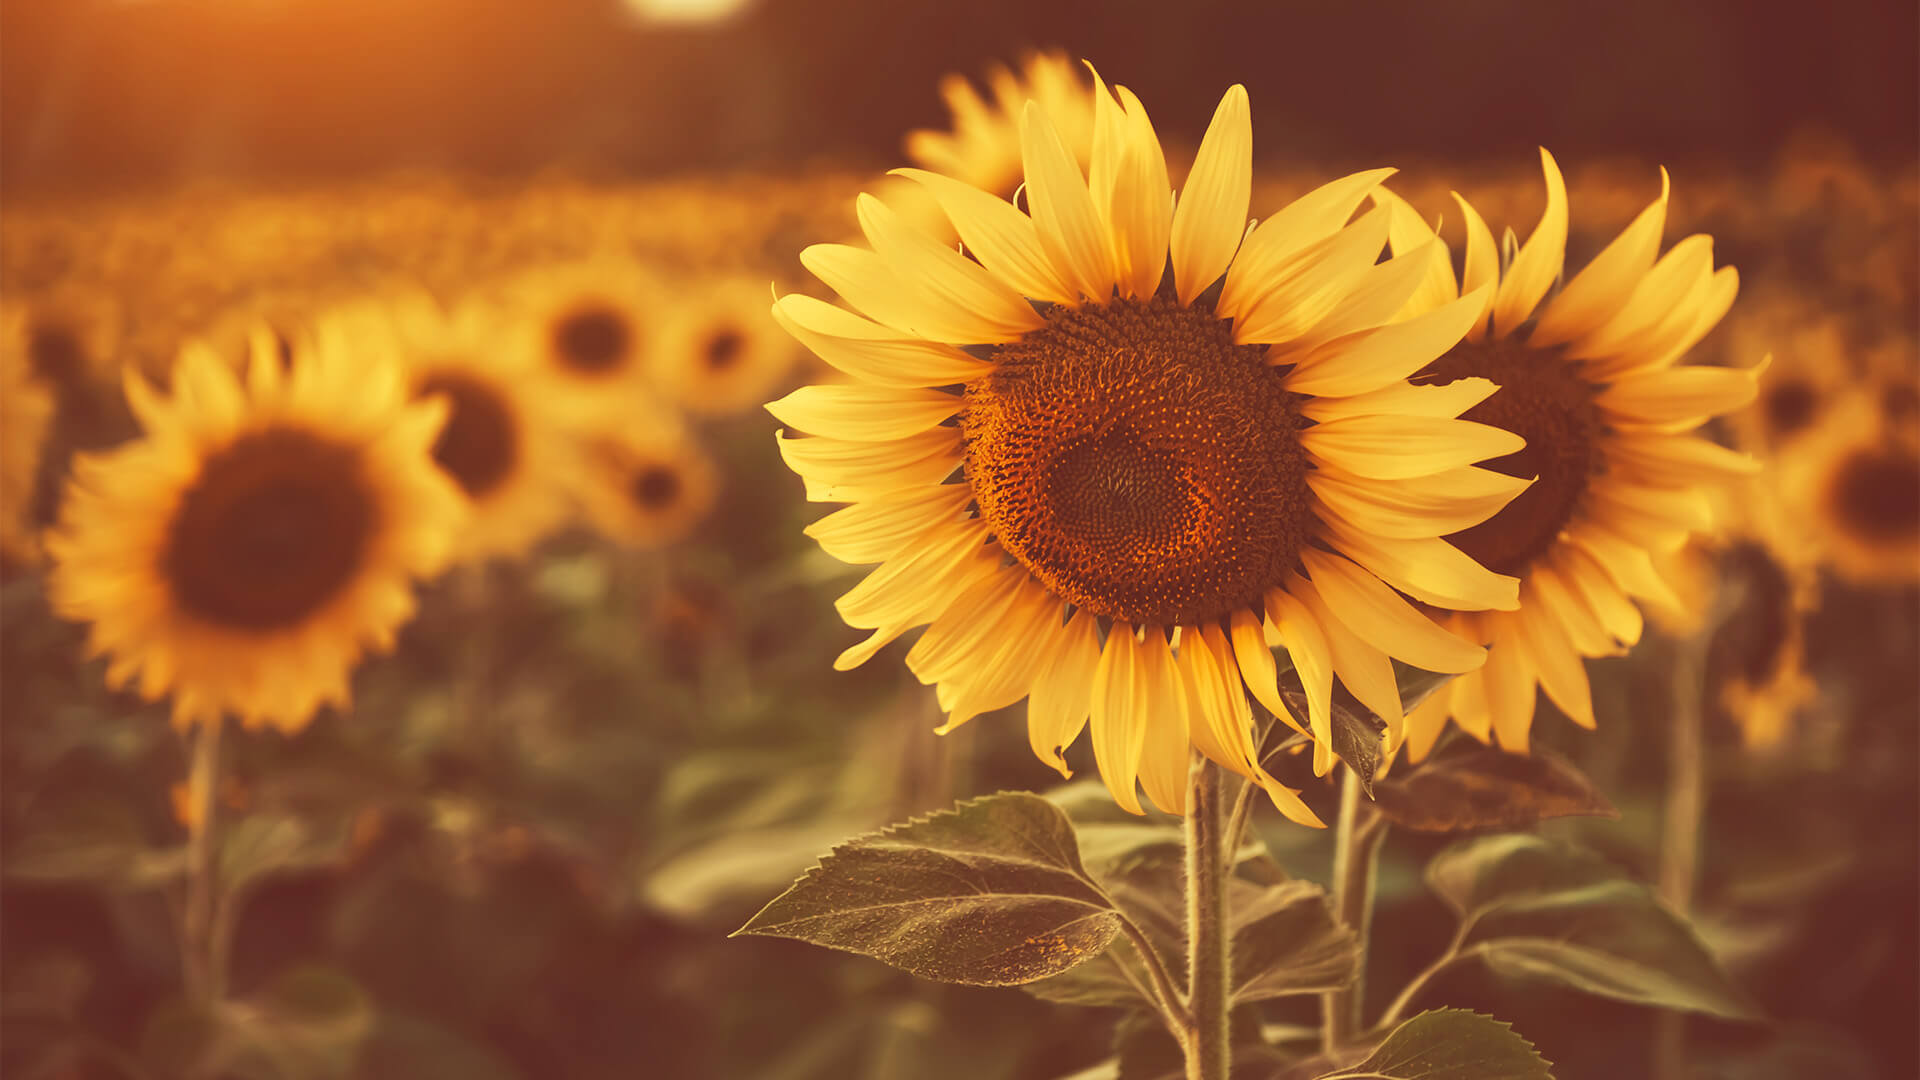 What Nutritional Value Do Sunflowers Hold?